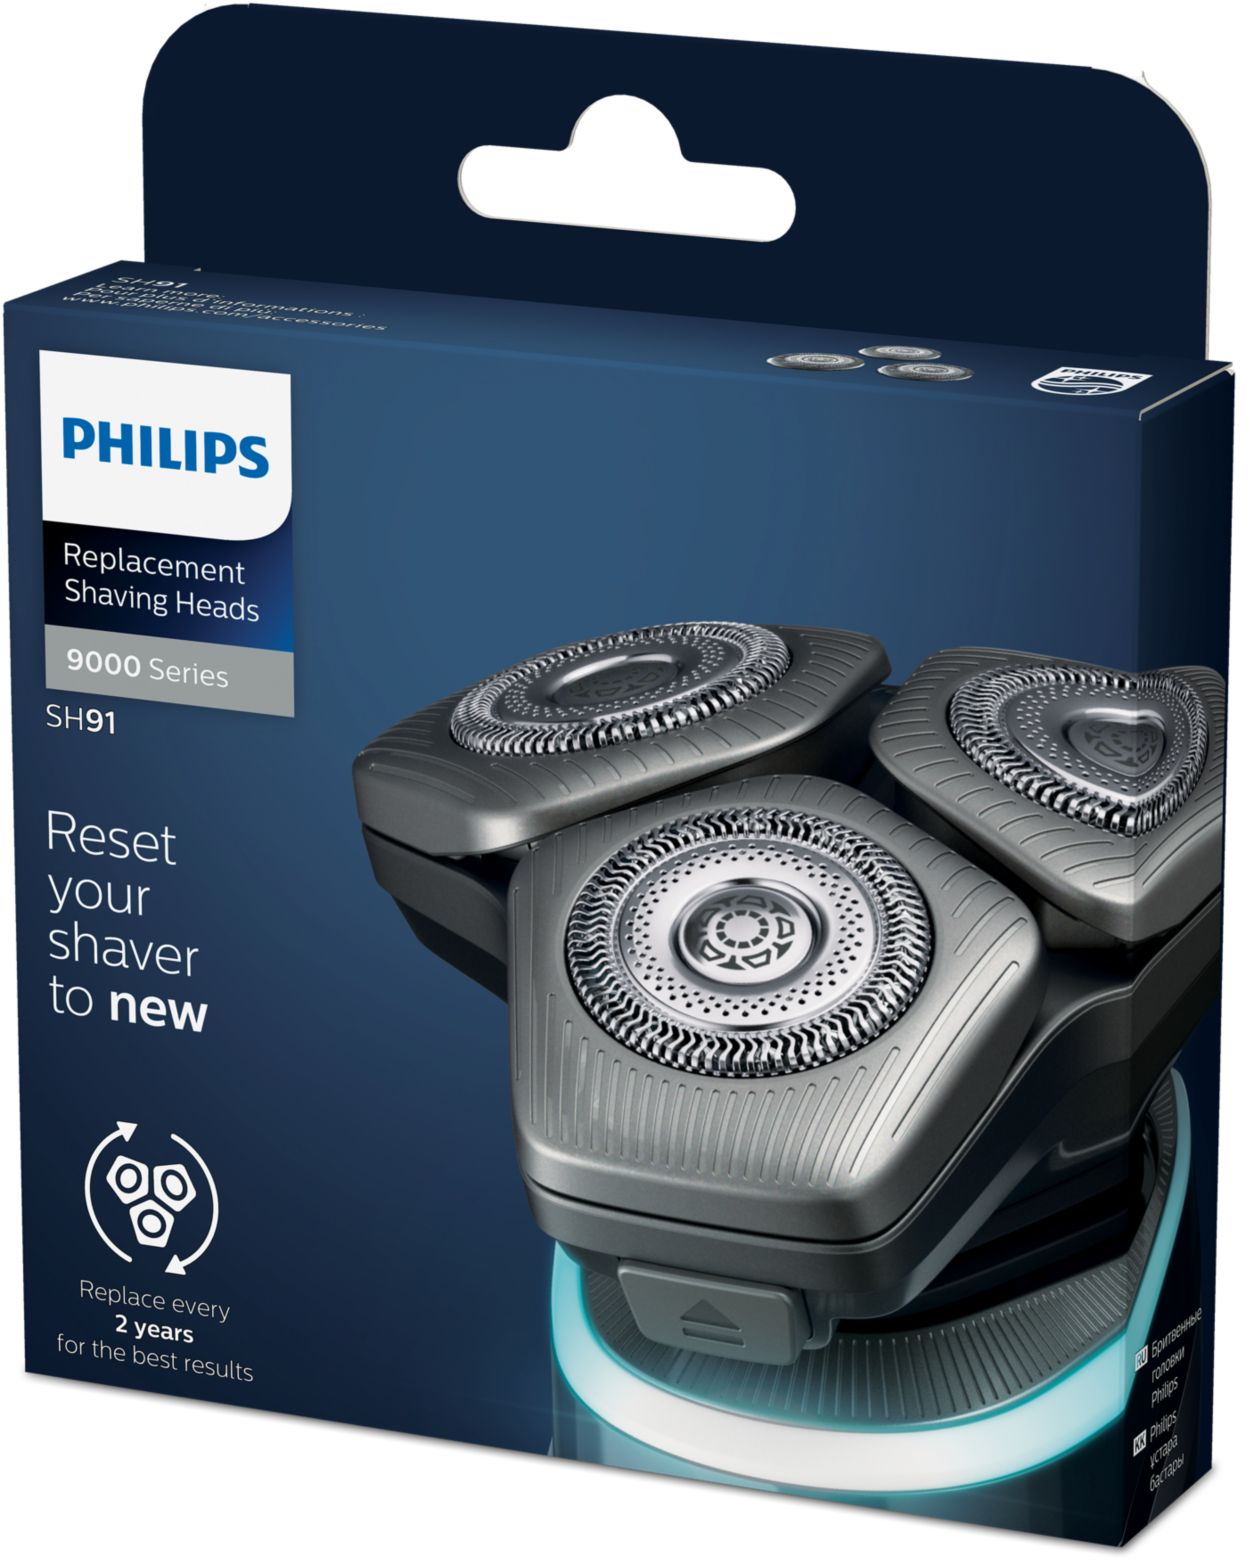 heads SH91/50 series 9000 Shaver Replacement | Philips SP9000 shaving and